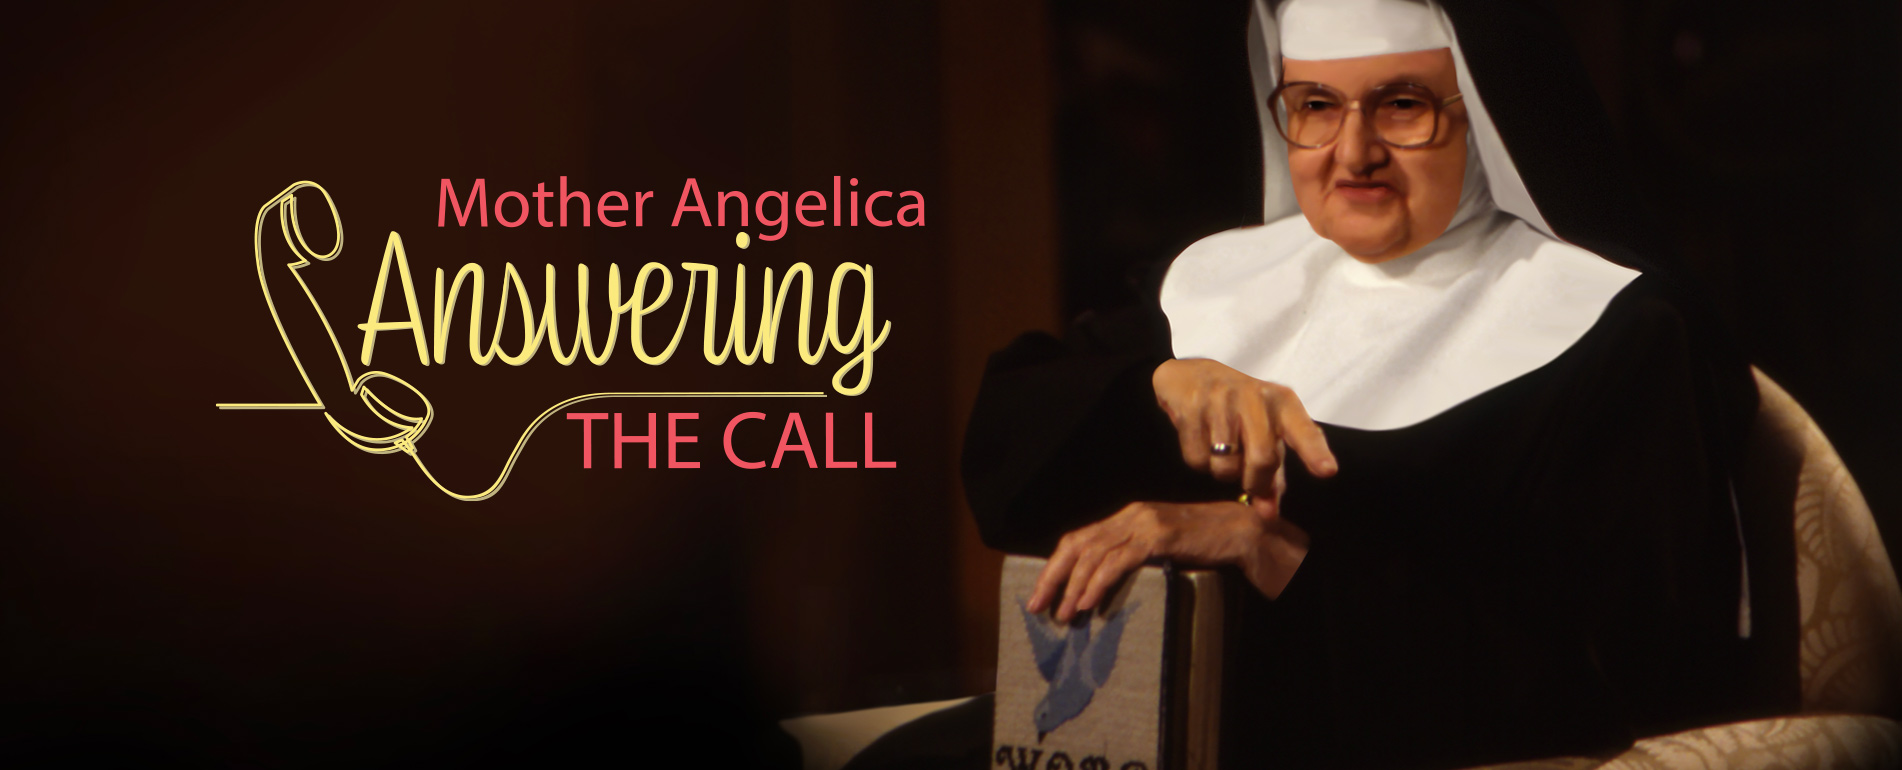 Mother Angelica Answering the Call